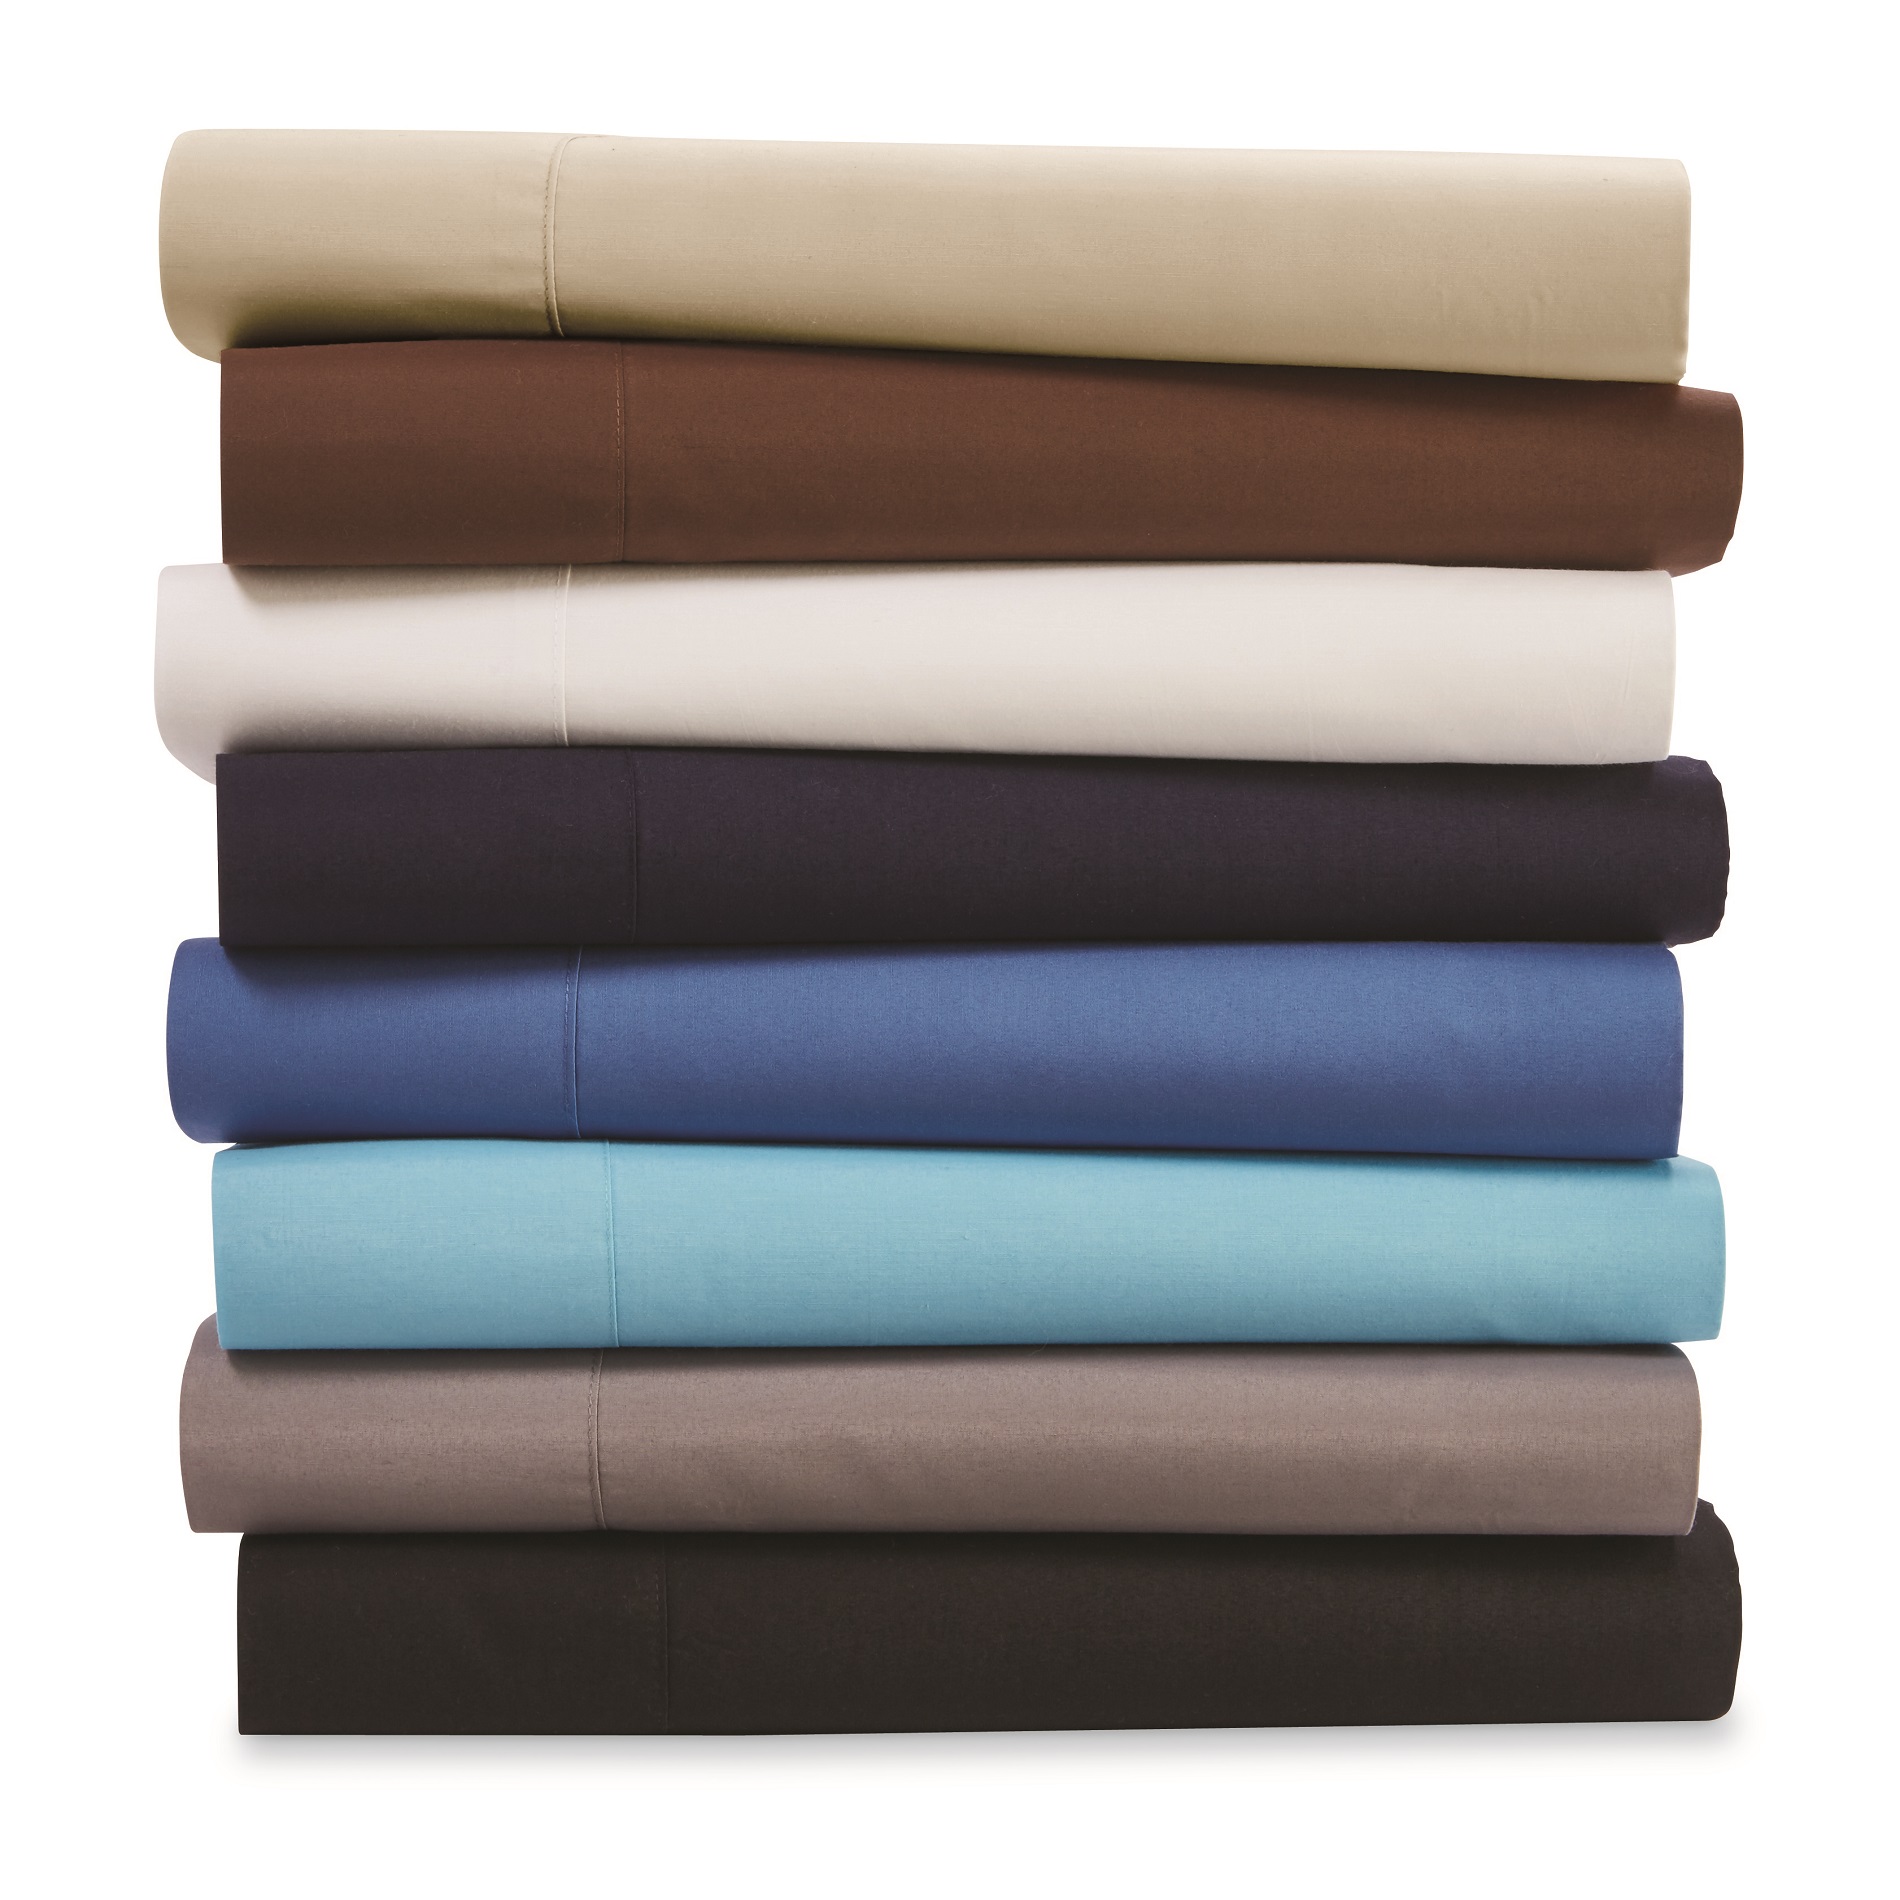 Cannon 200 Thread-Count Flat Sheet